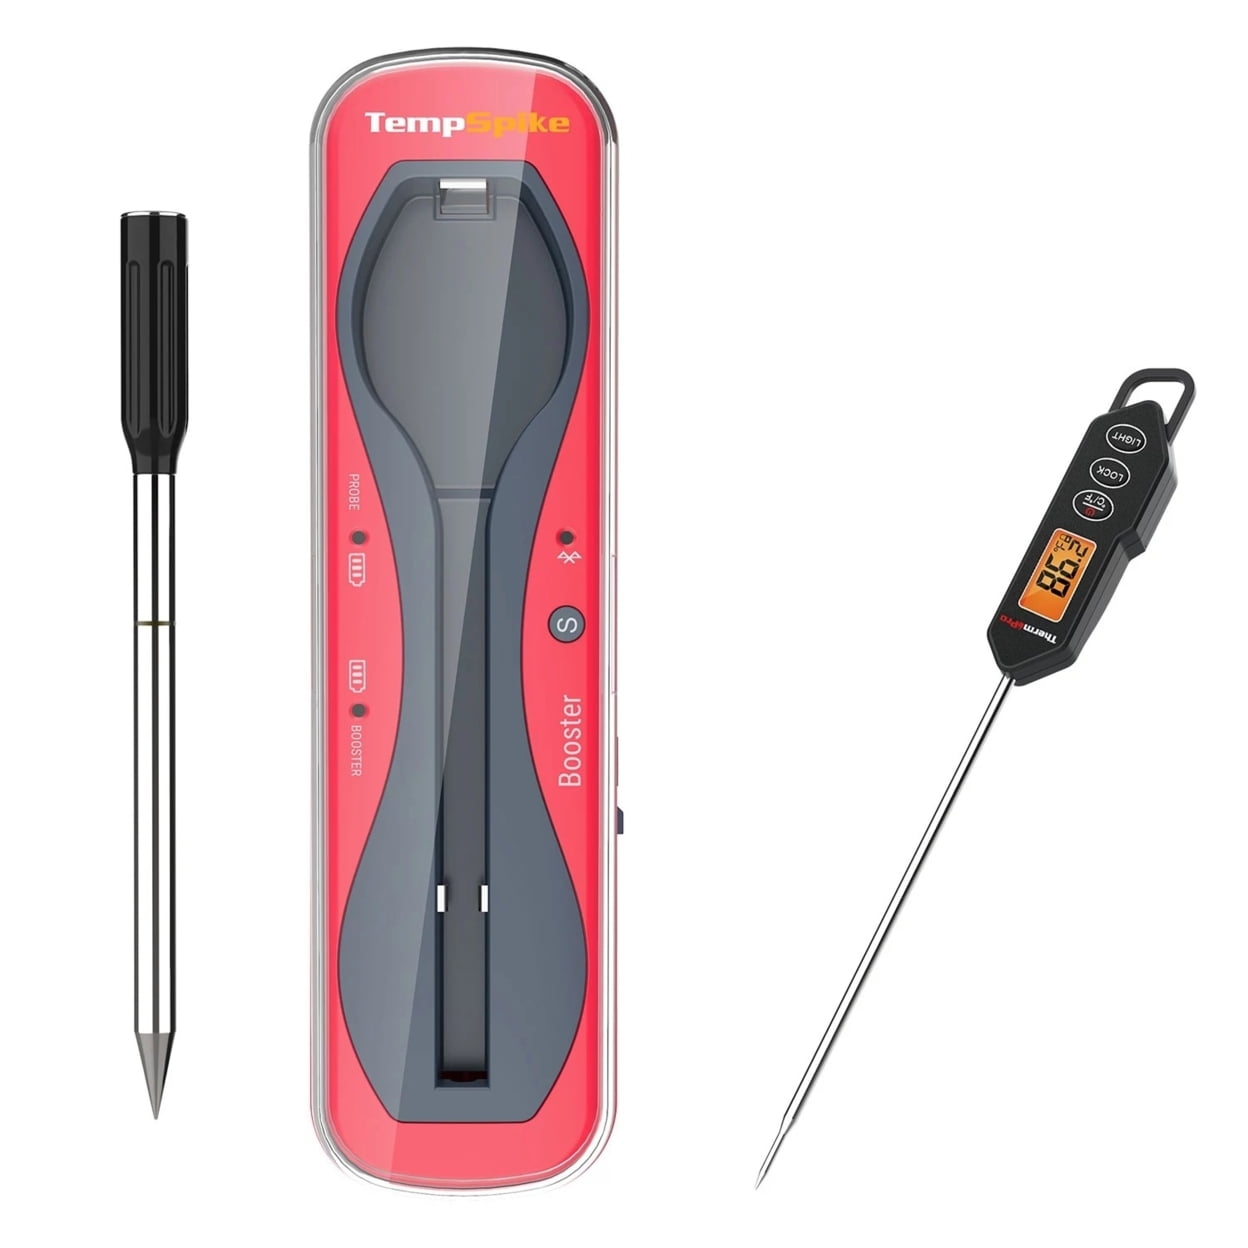 ThermoPro TempSpike Truly Wireless Bluetooth Meat Thermometer